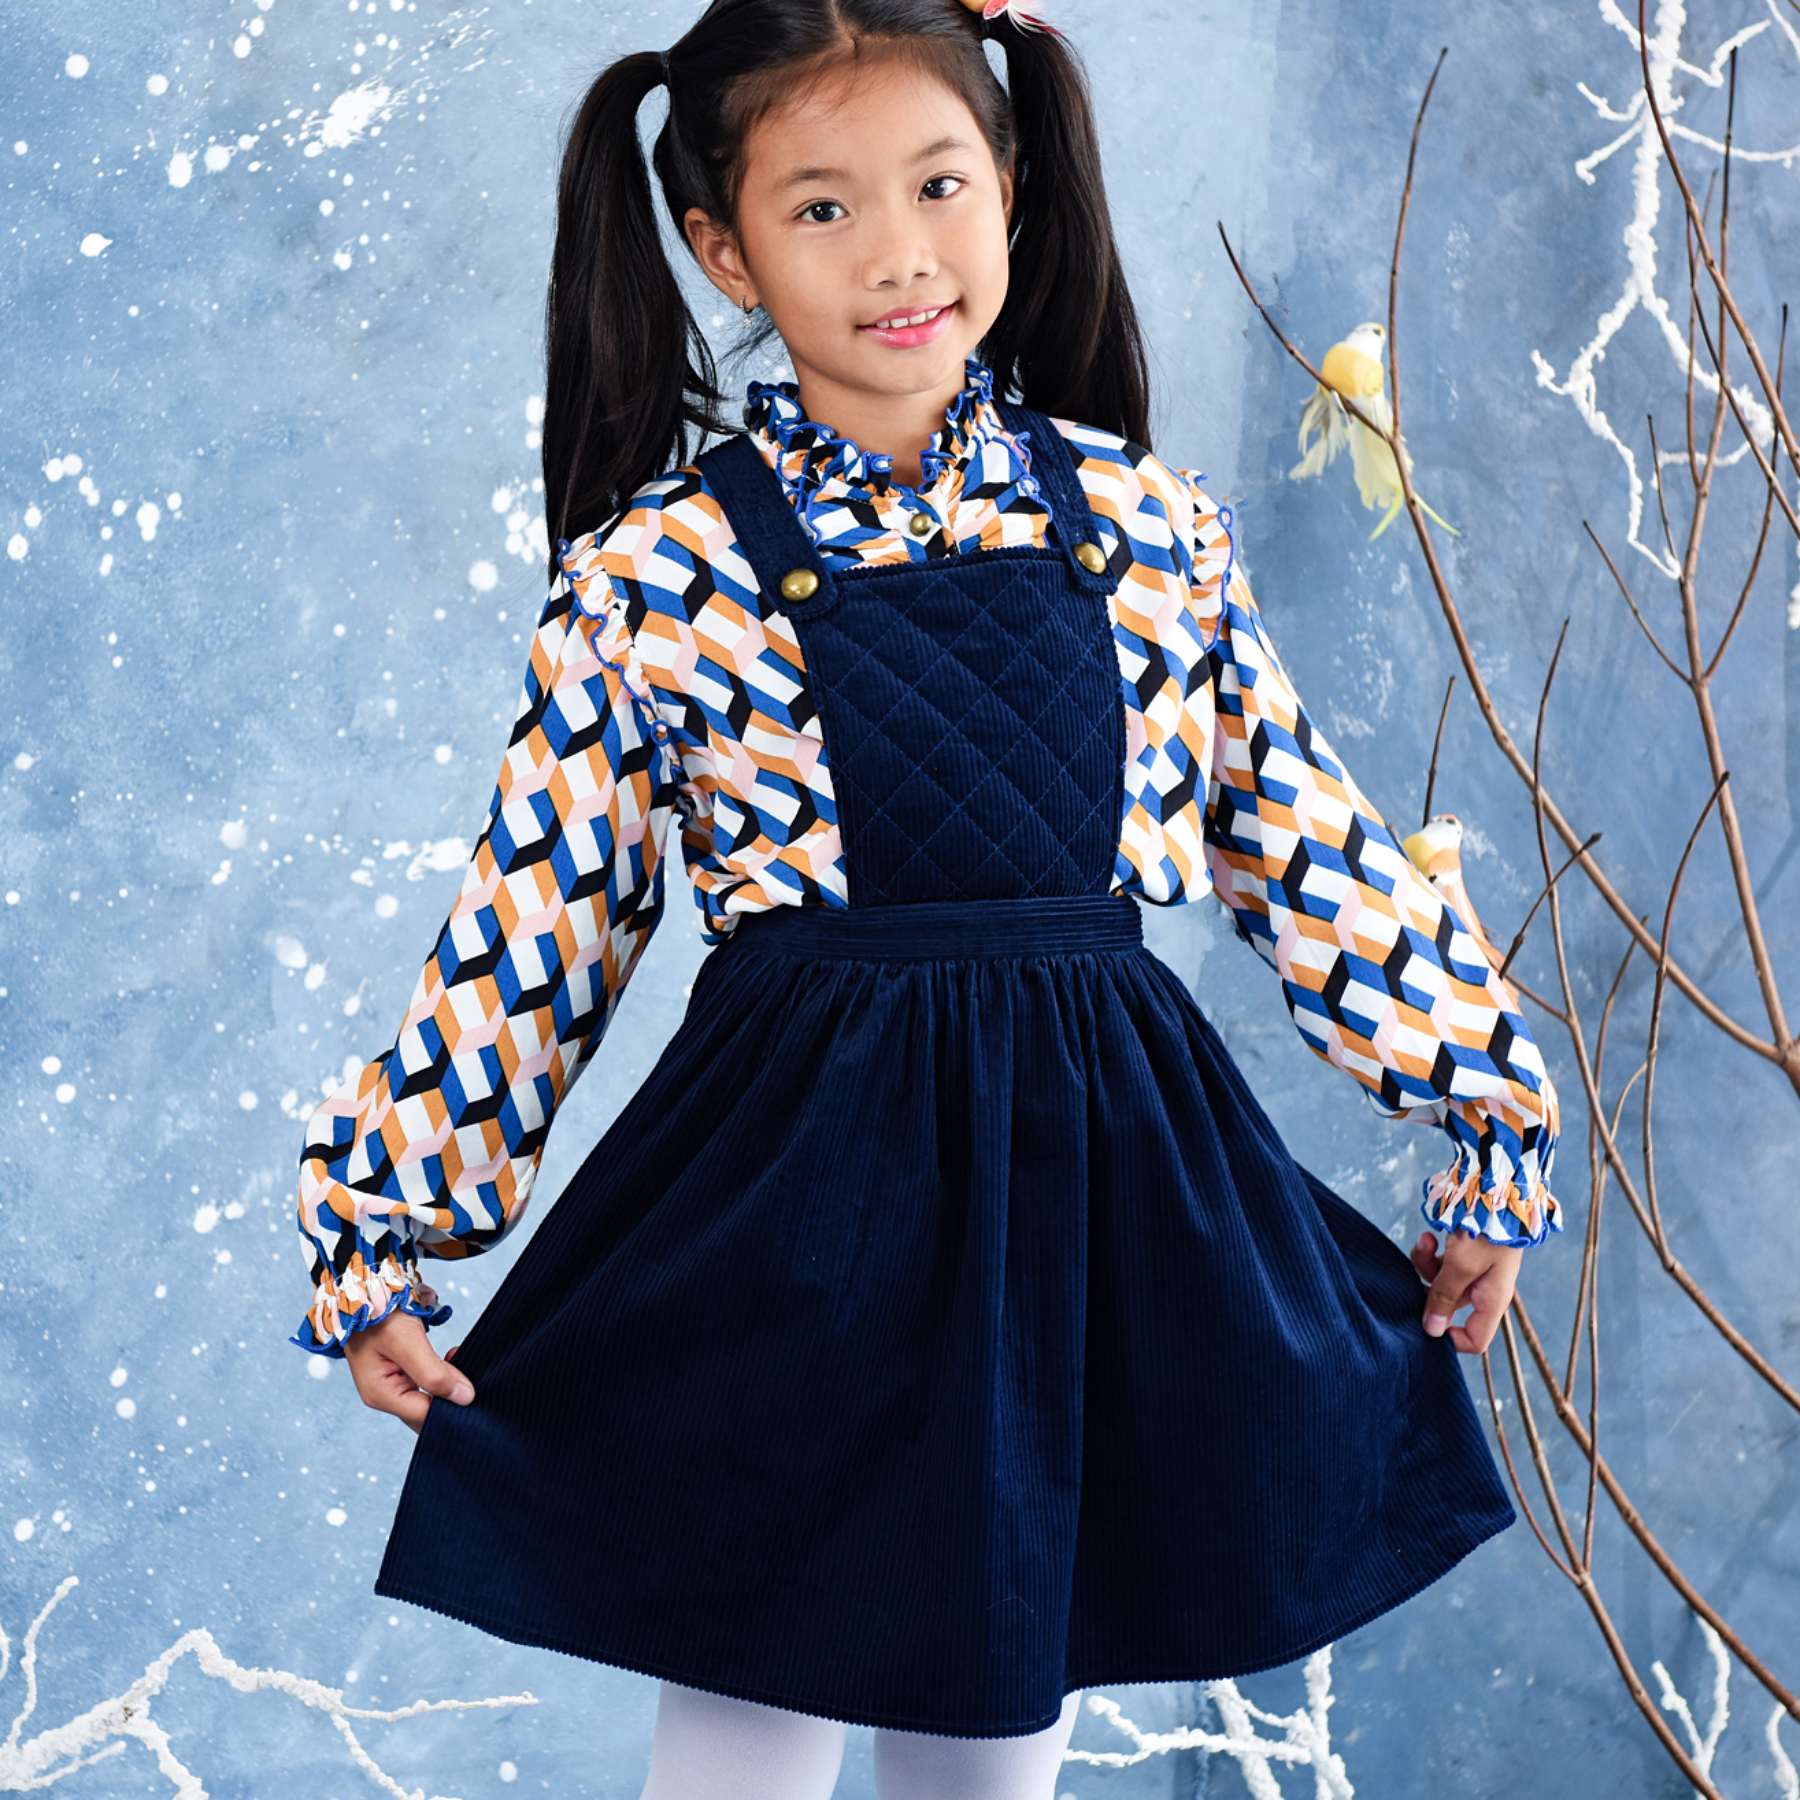 navy blue velvet apron dress for girls and young women from the children's fashion brand la faute a voltaire